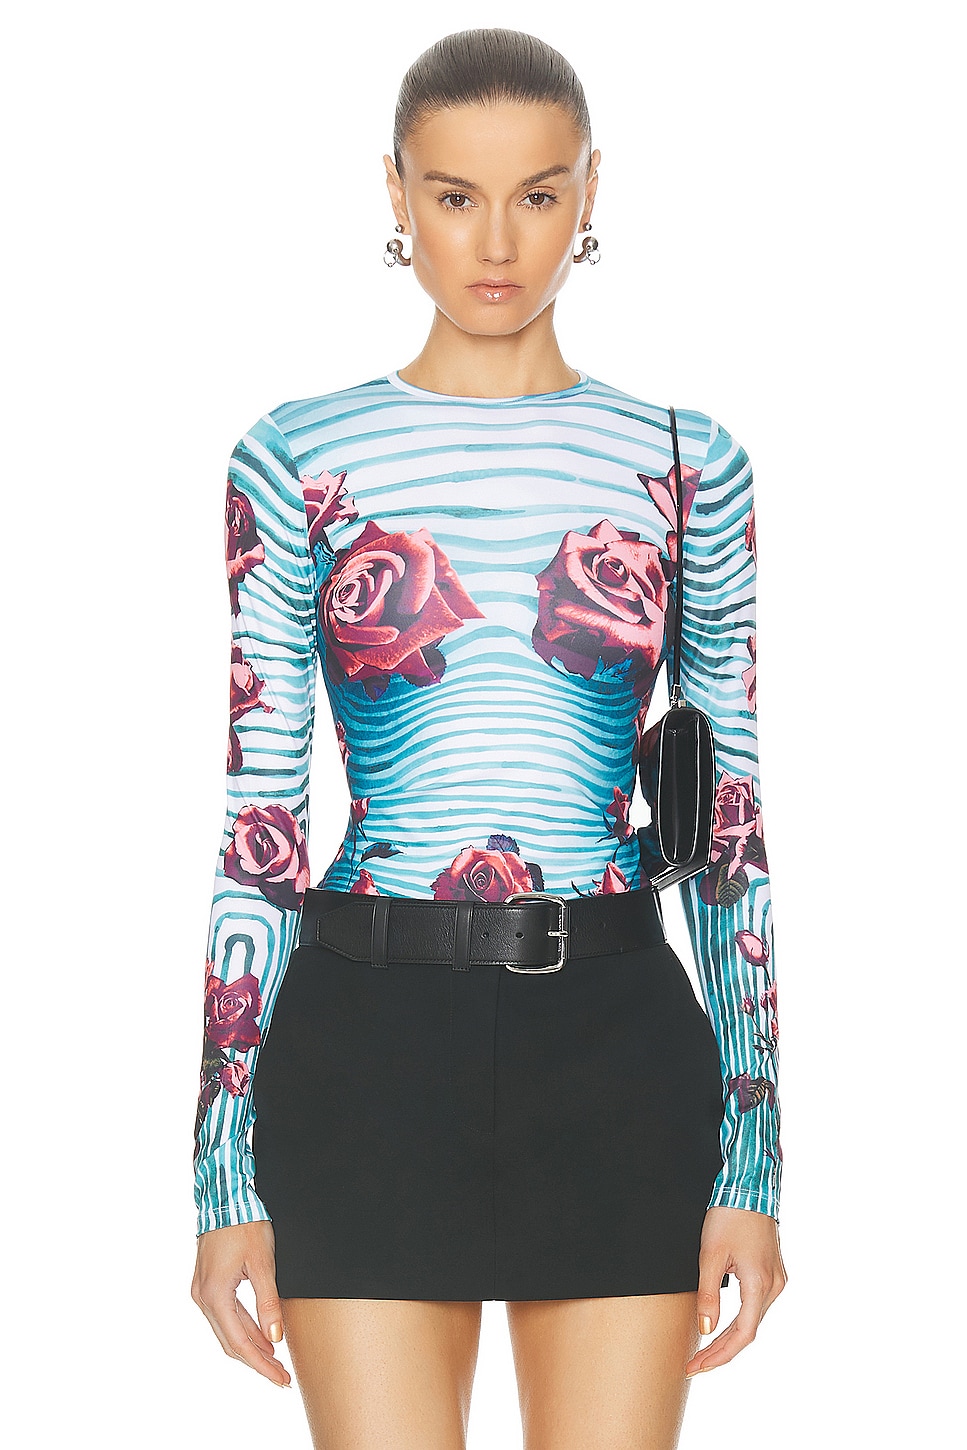 Image 1 of Jean Paul Gaultier Flower Body Morphing Long Sleeve Top in Blue, Red, & White